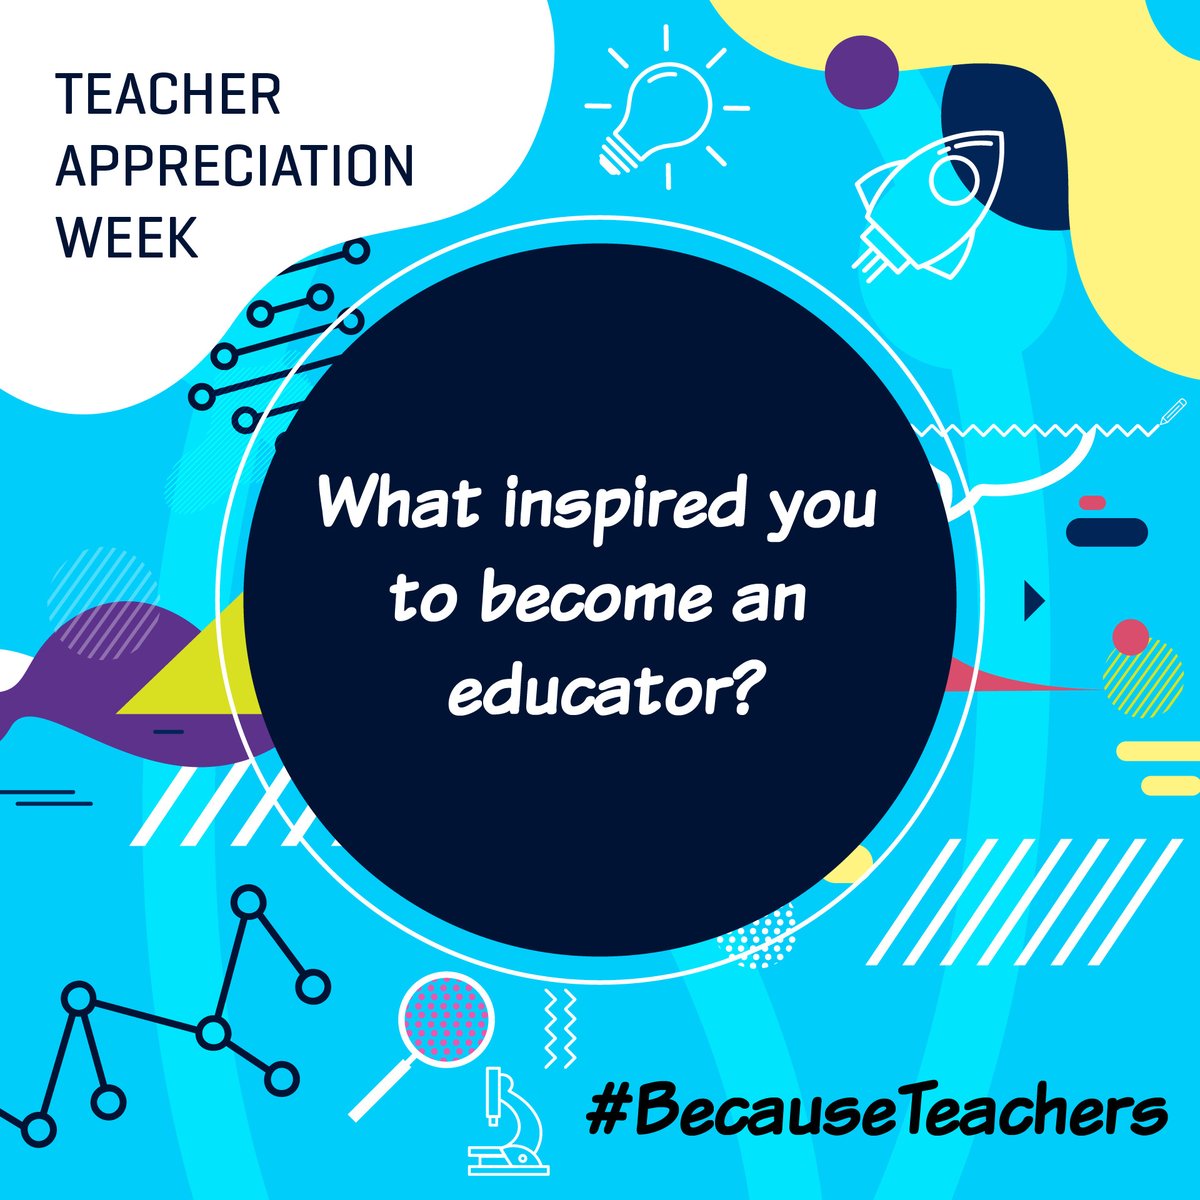 Throwback Thursday! Teachers, we want to hear from YOU! What is your earliest science class memory? What early science class memories stand out to you? What inspired you to become an educator? #BecauseTeachers #NSTA #TeacherAppreciationWeek